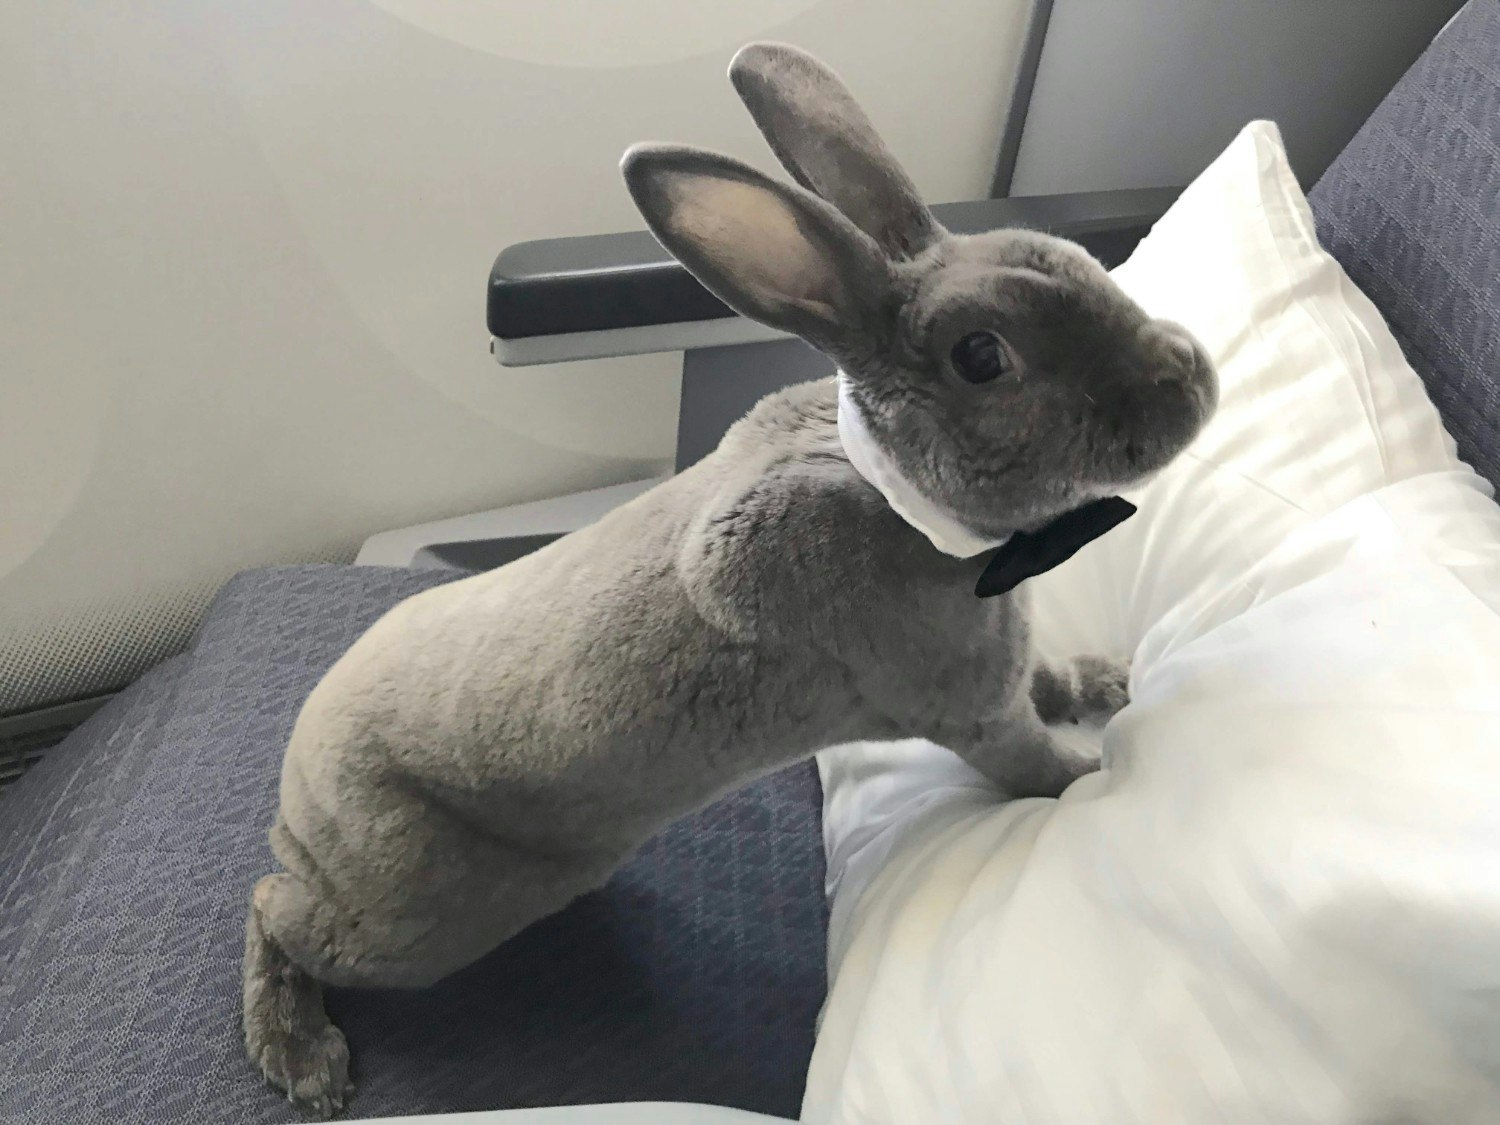 Coco the rabbit on an airplane seat 